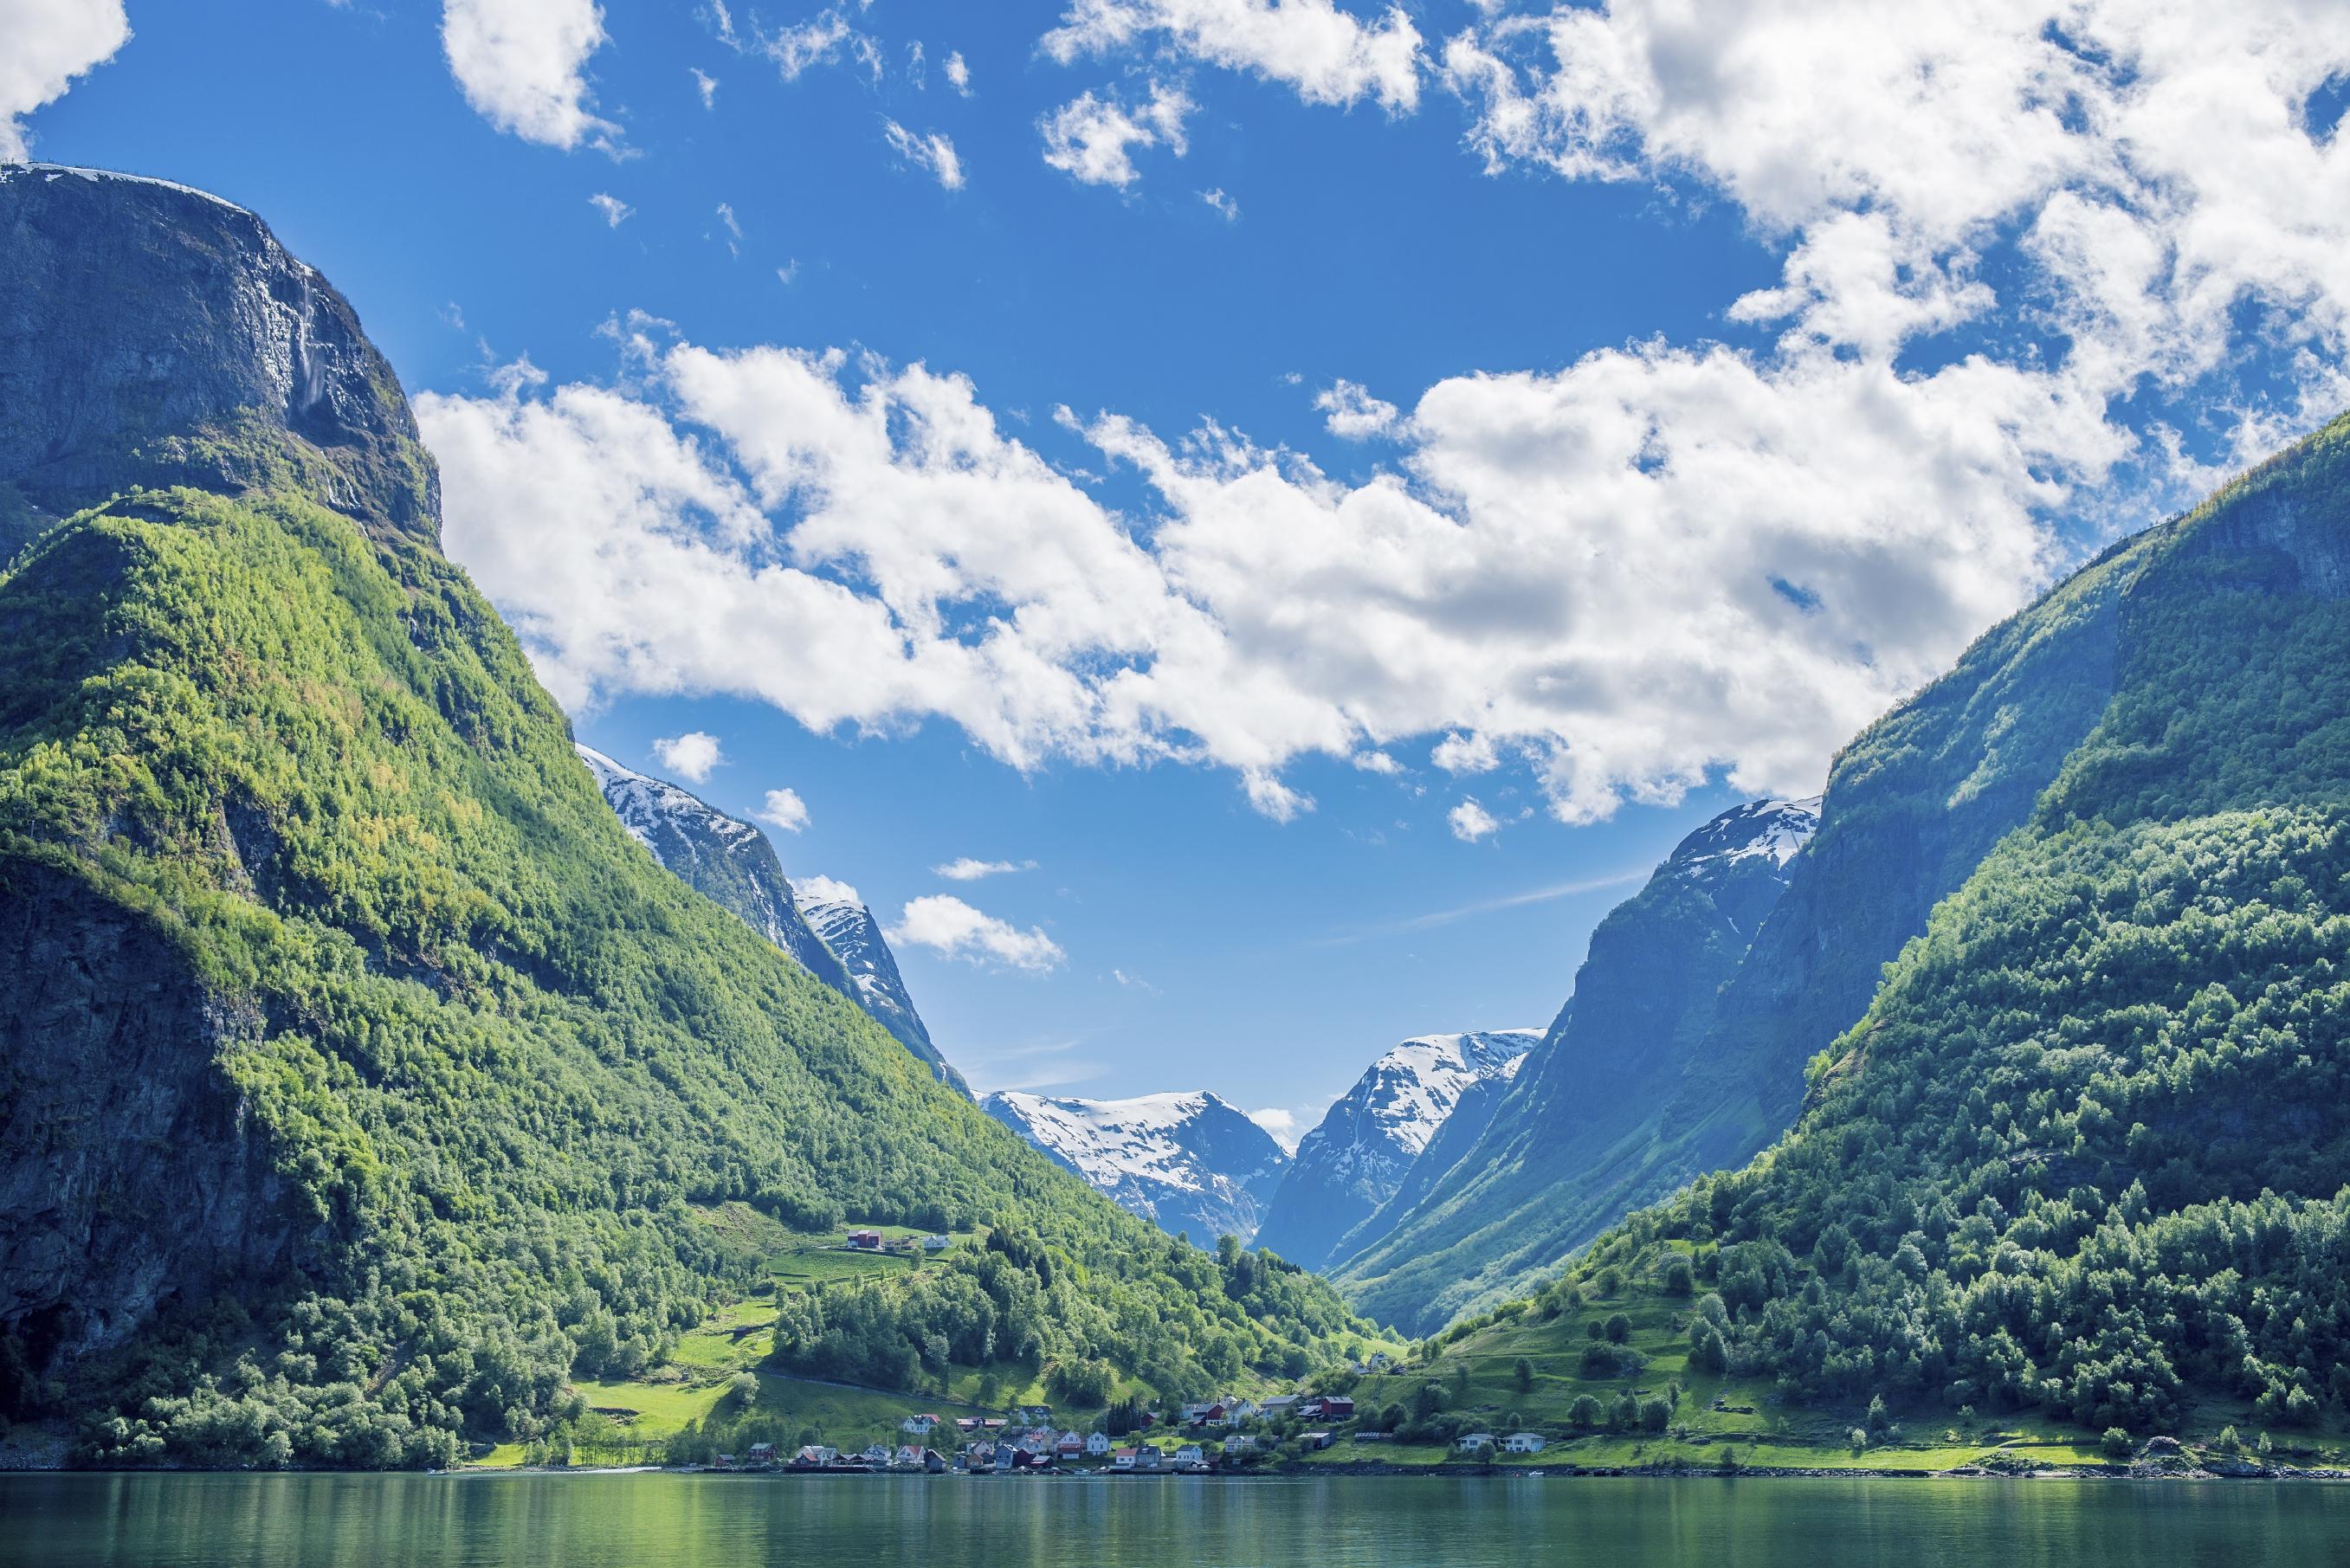 10 Best Norway Fjords Tours And Vacation Packages 2020 2021 Tourradar